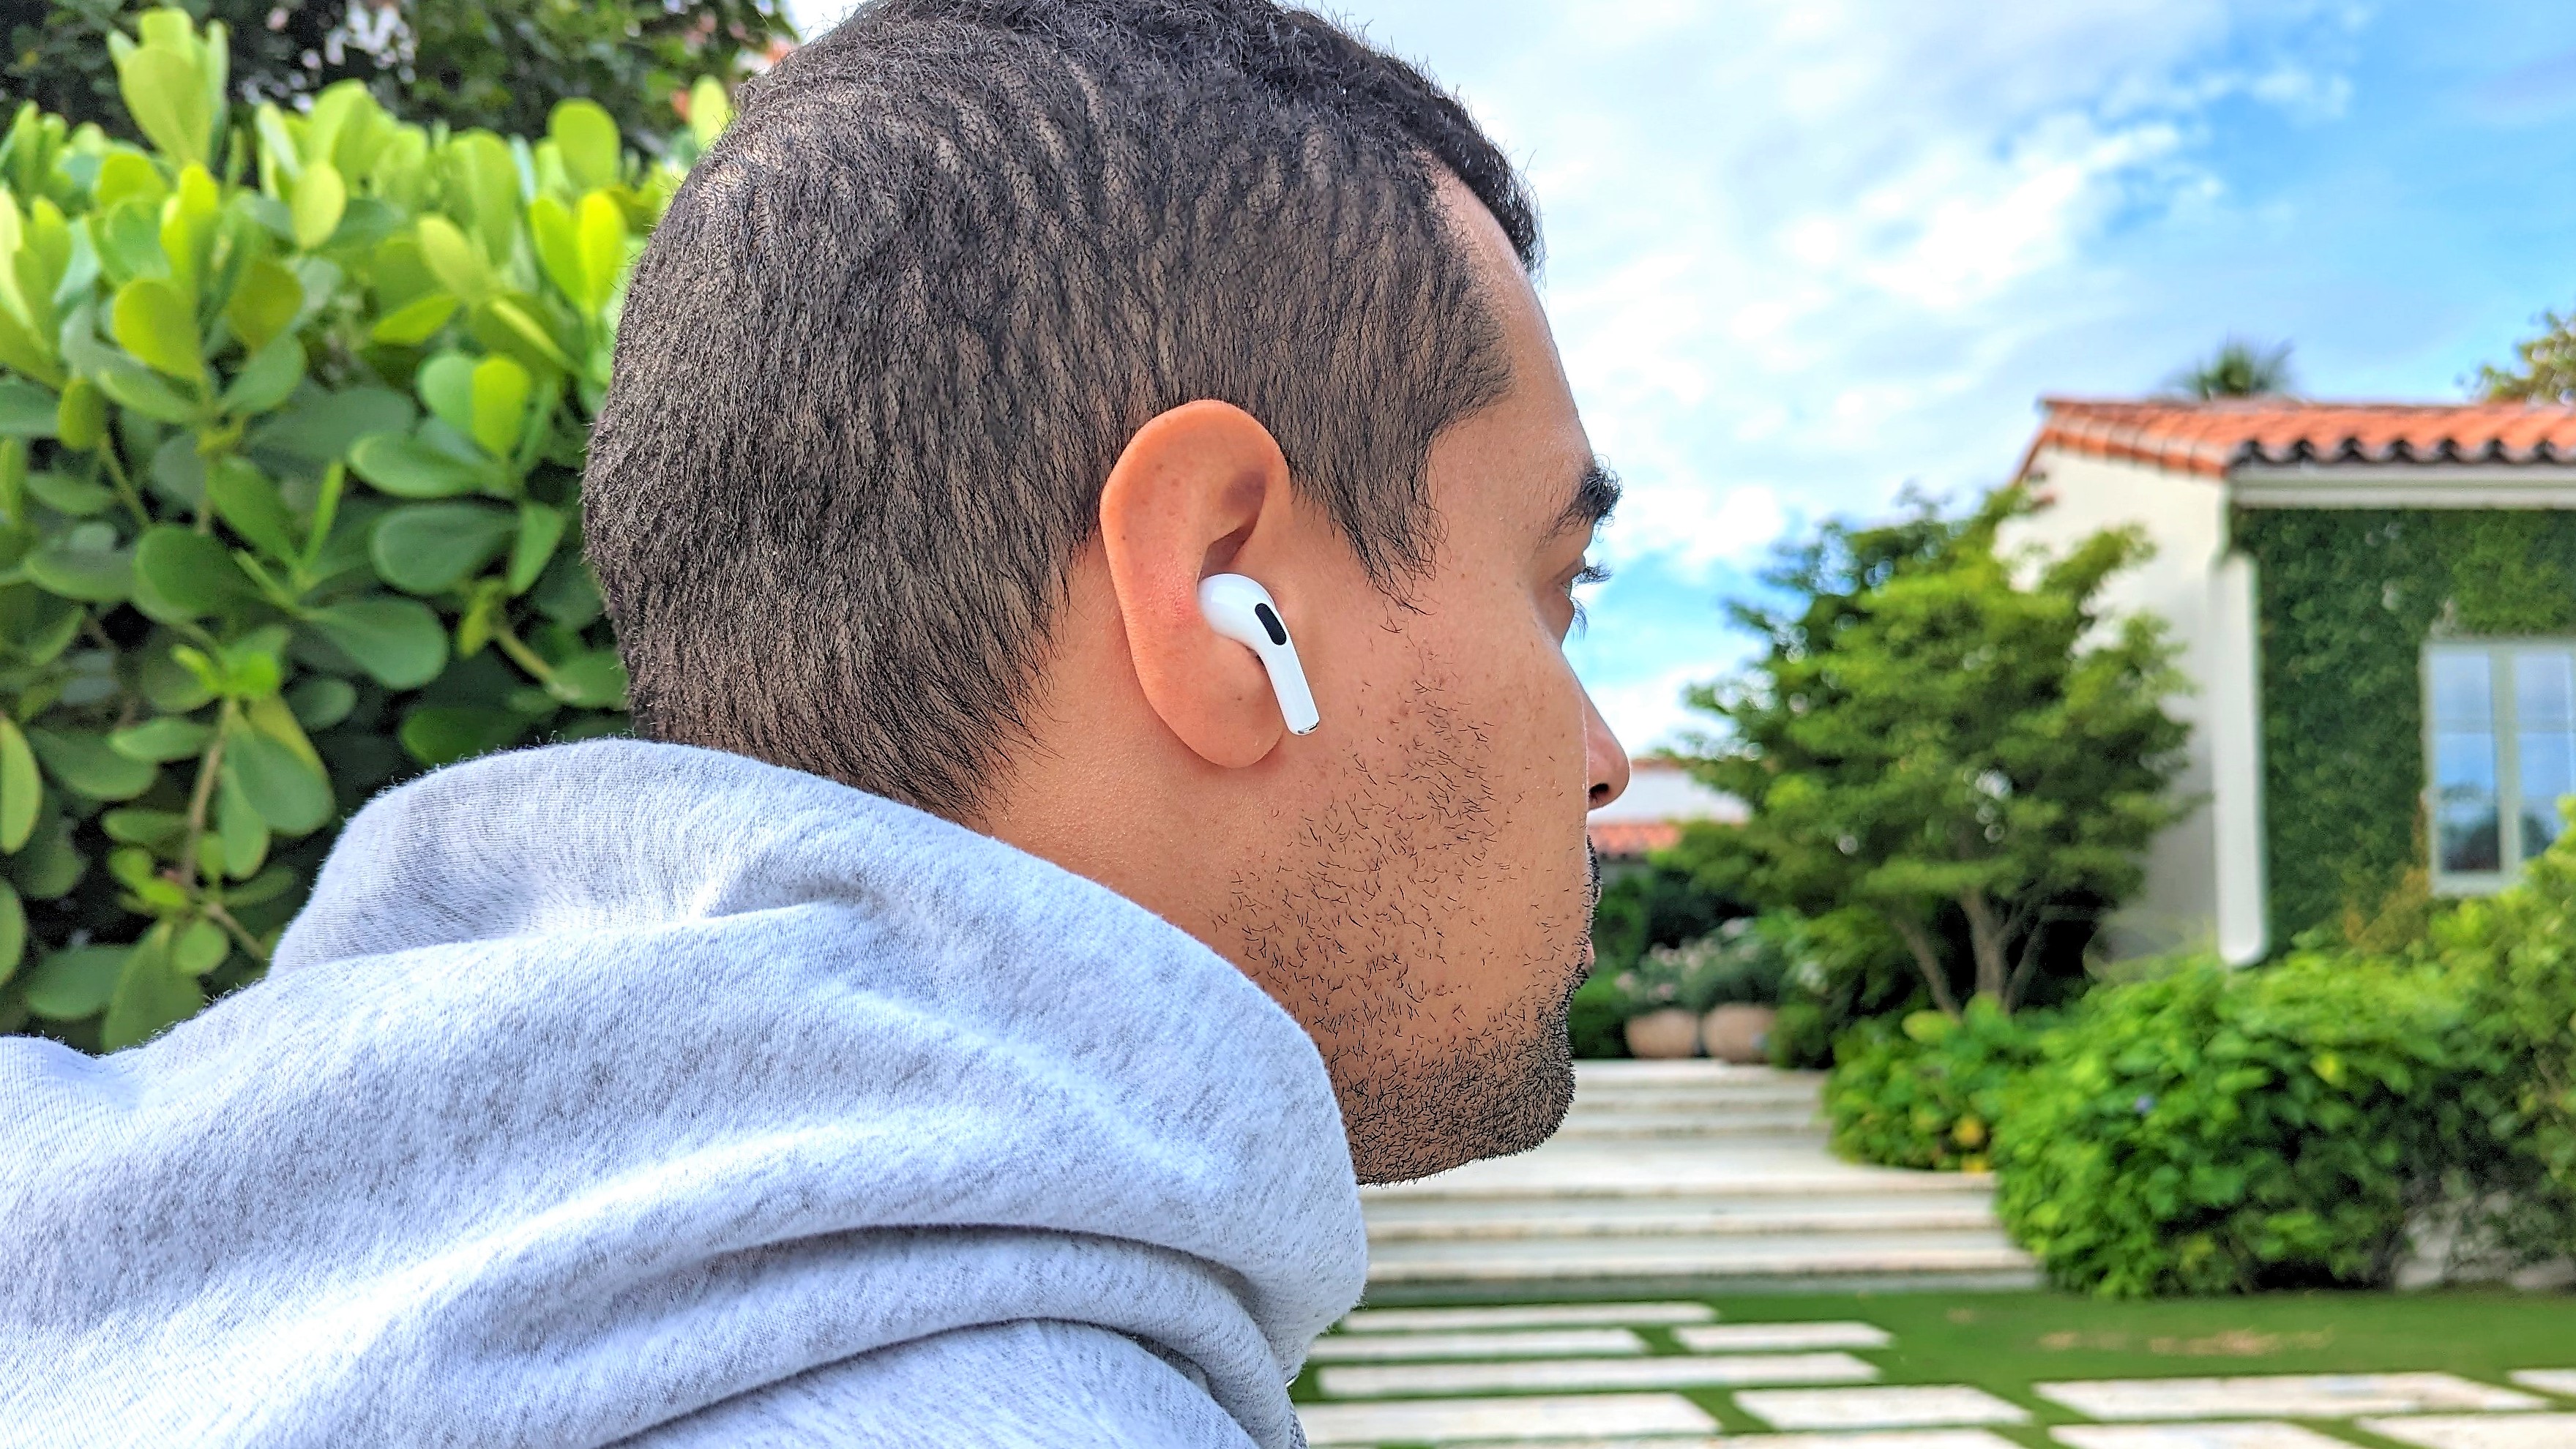 Our reviewer running with AirPods Pro 2